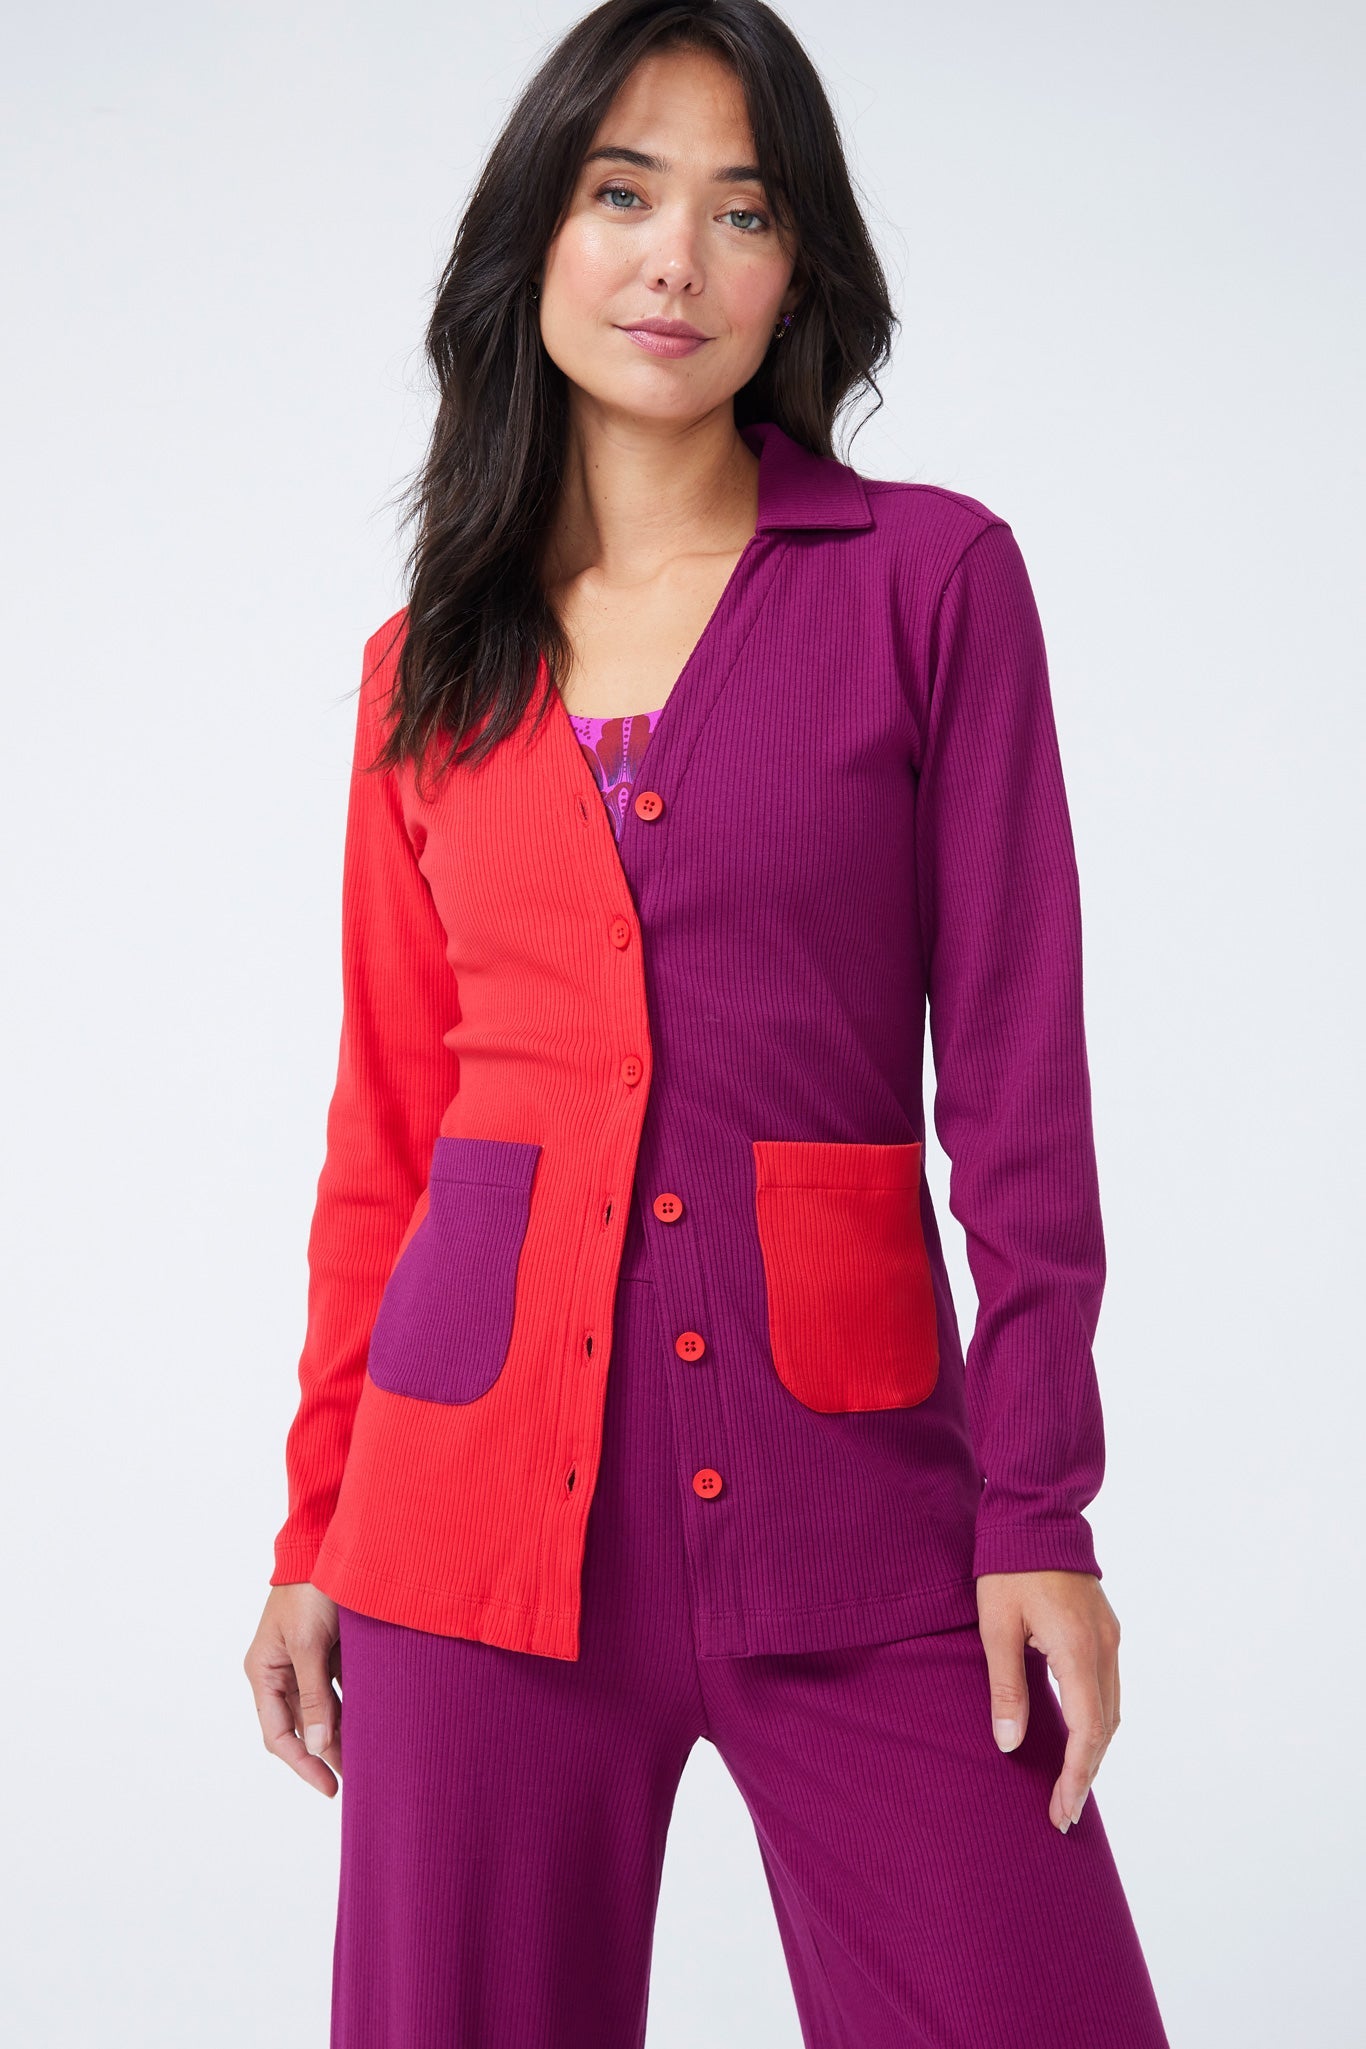 Rib Cardigan in Black Raspberry and Hot Red